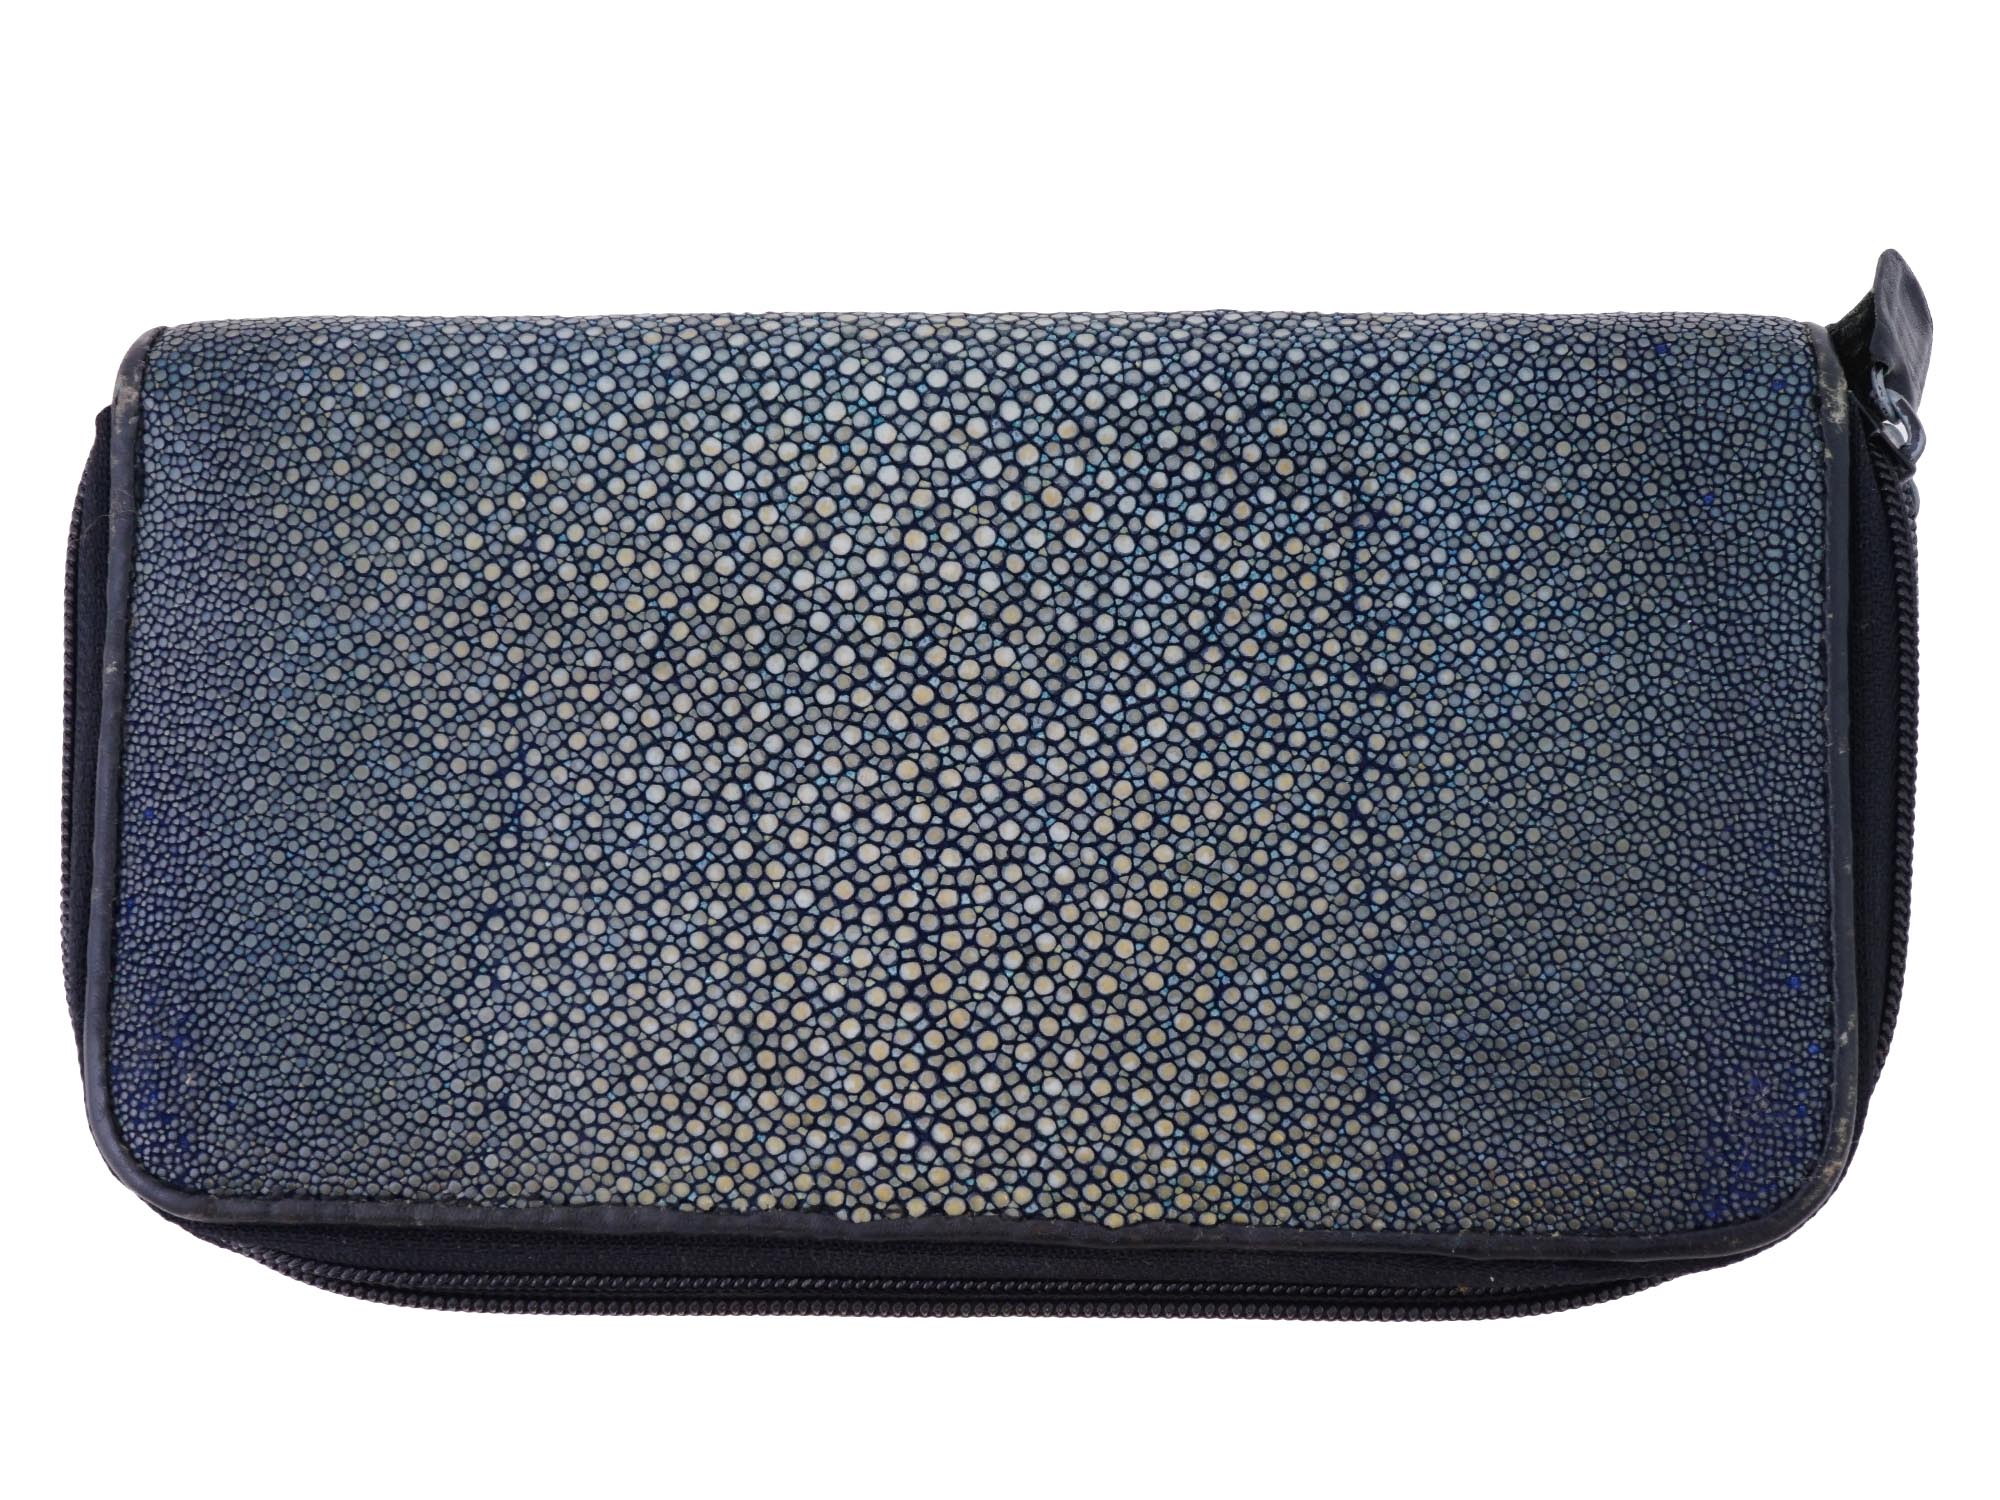 VINTAGE BLUE SHAGREEN LEATHER DOUBLE ZIP WALLET PIC-1